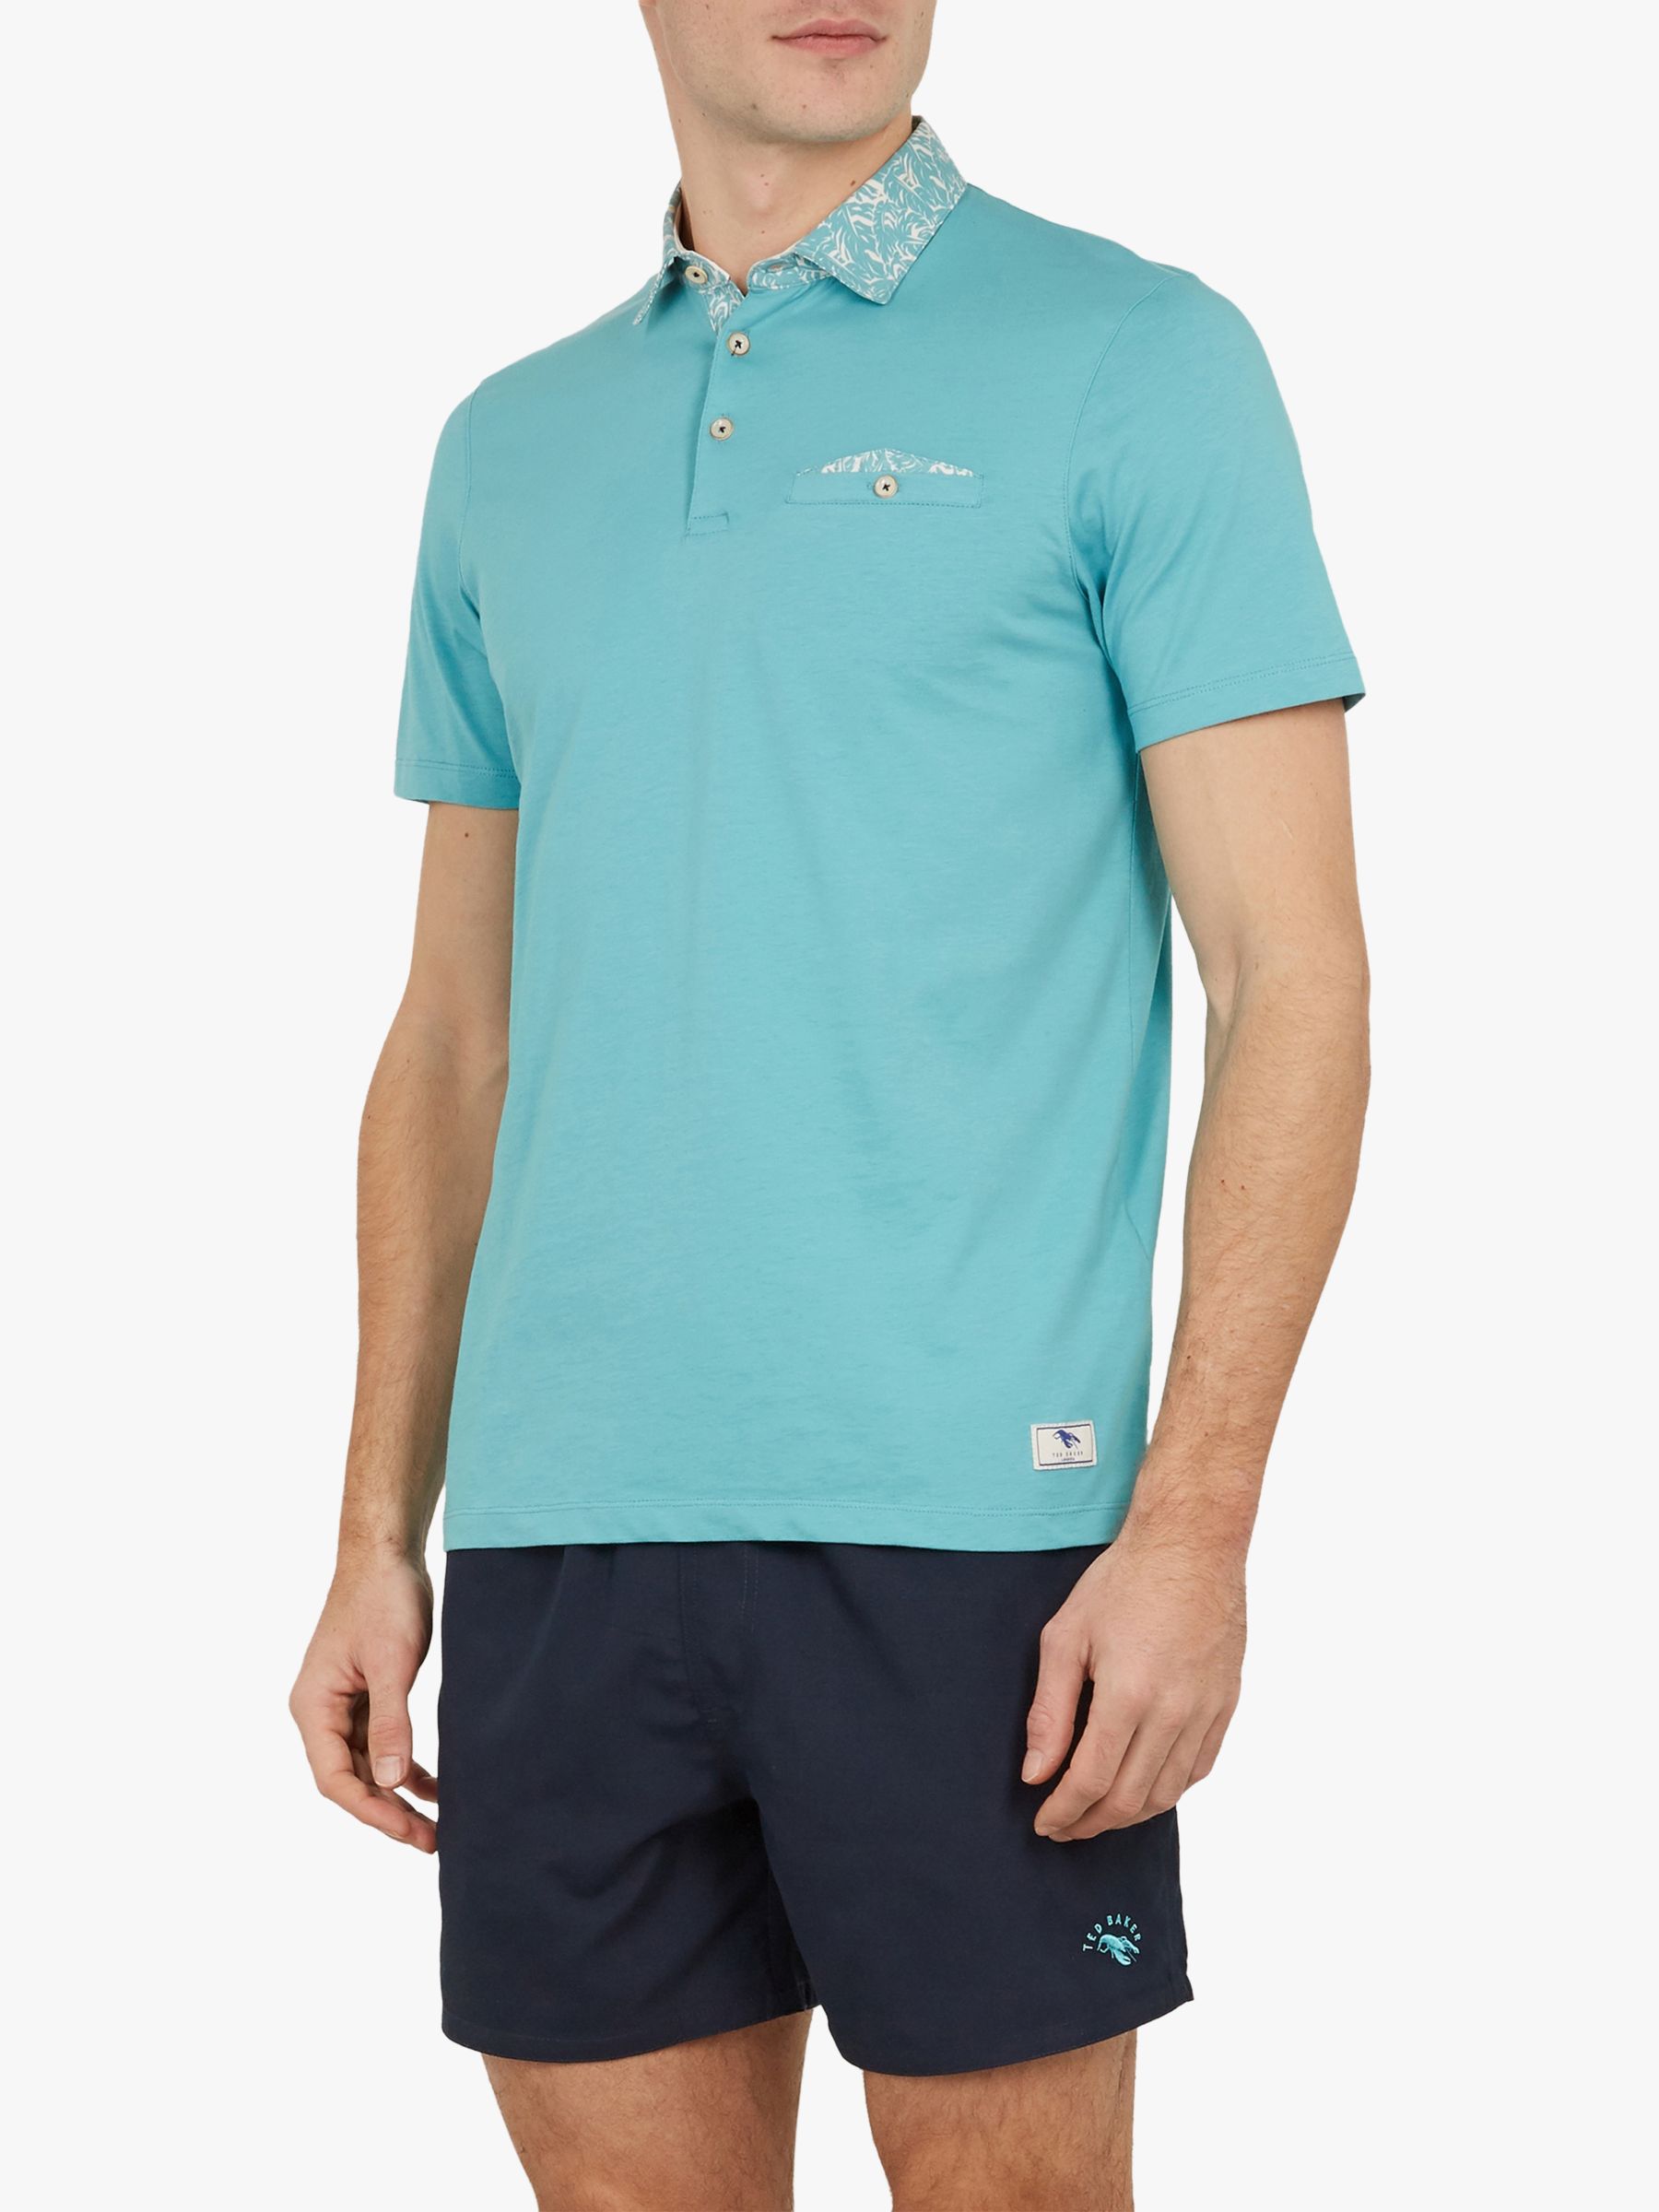 Ted Baker Wale Printed Collar Polo Shirt, Turquoise